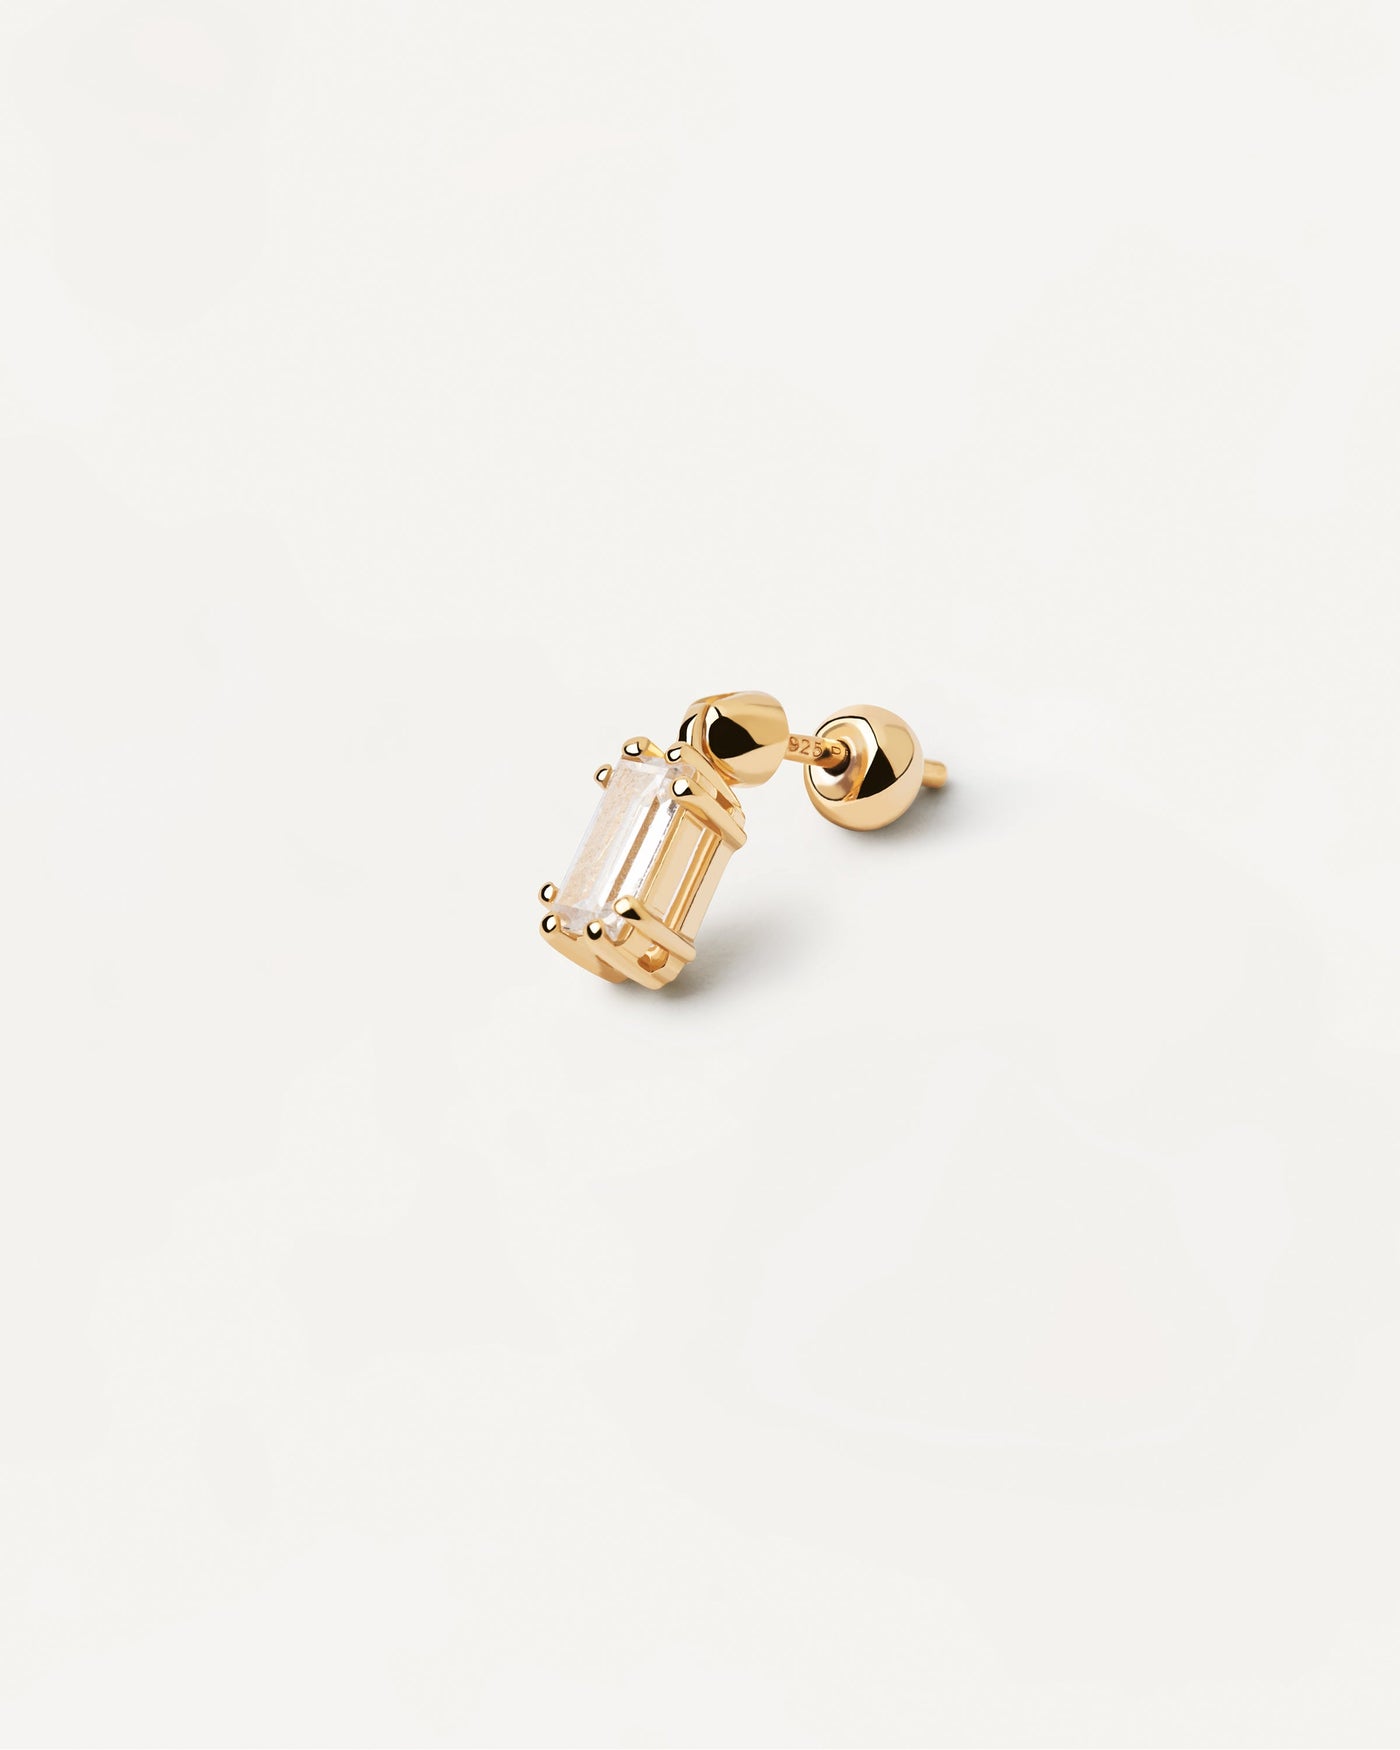 2023 Selection | Ali Single Earring. Gold-plated ear piercing with baguette cut white zirconia. Get the latest arrival from PDPAOLA. Place your order safely and get this Best Seller. Free Shipping.